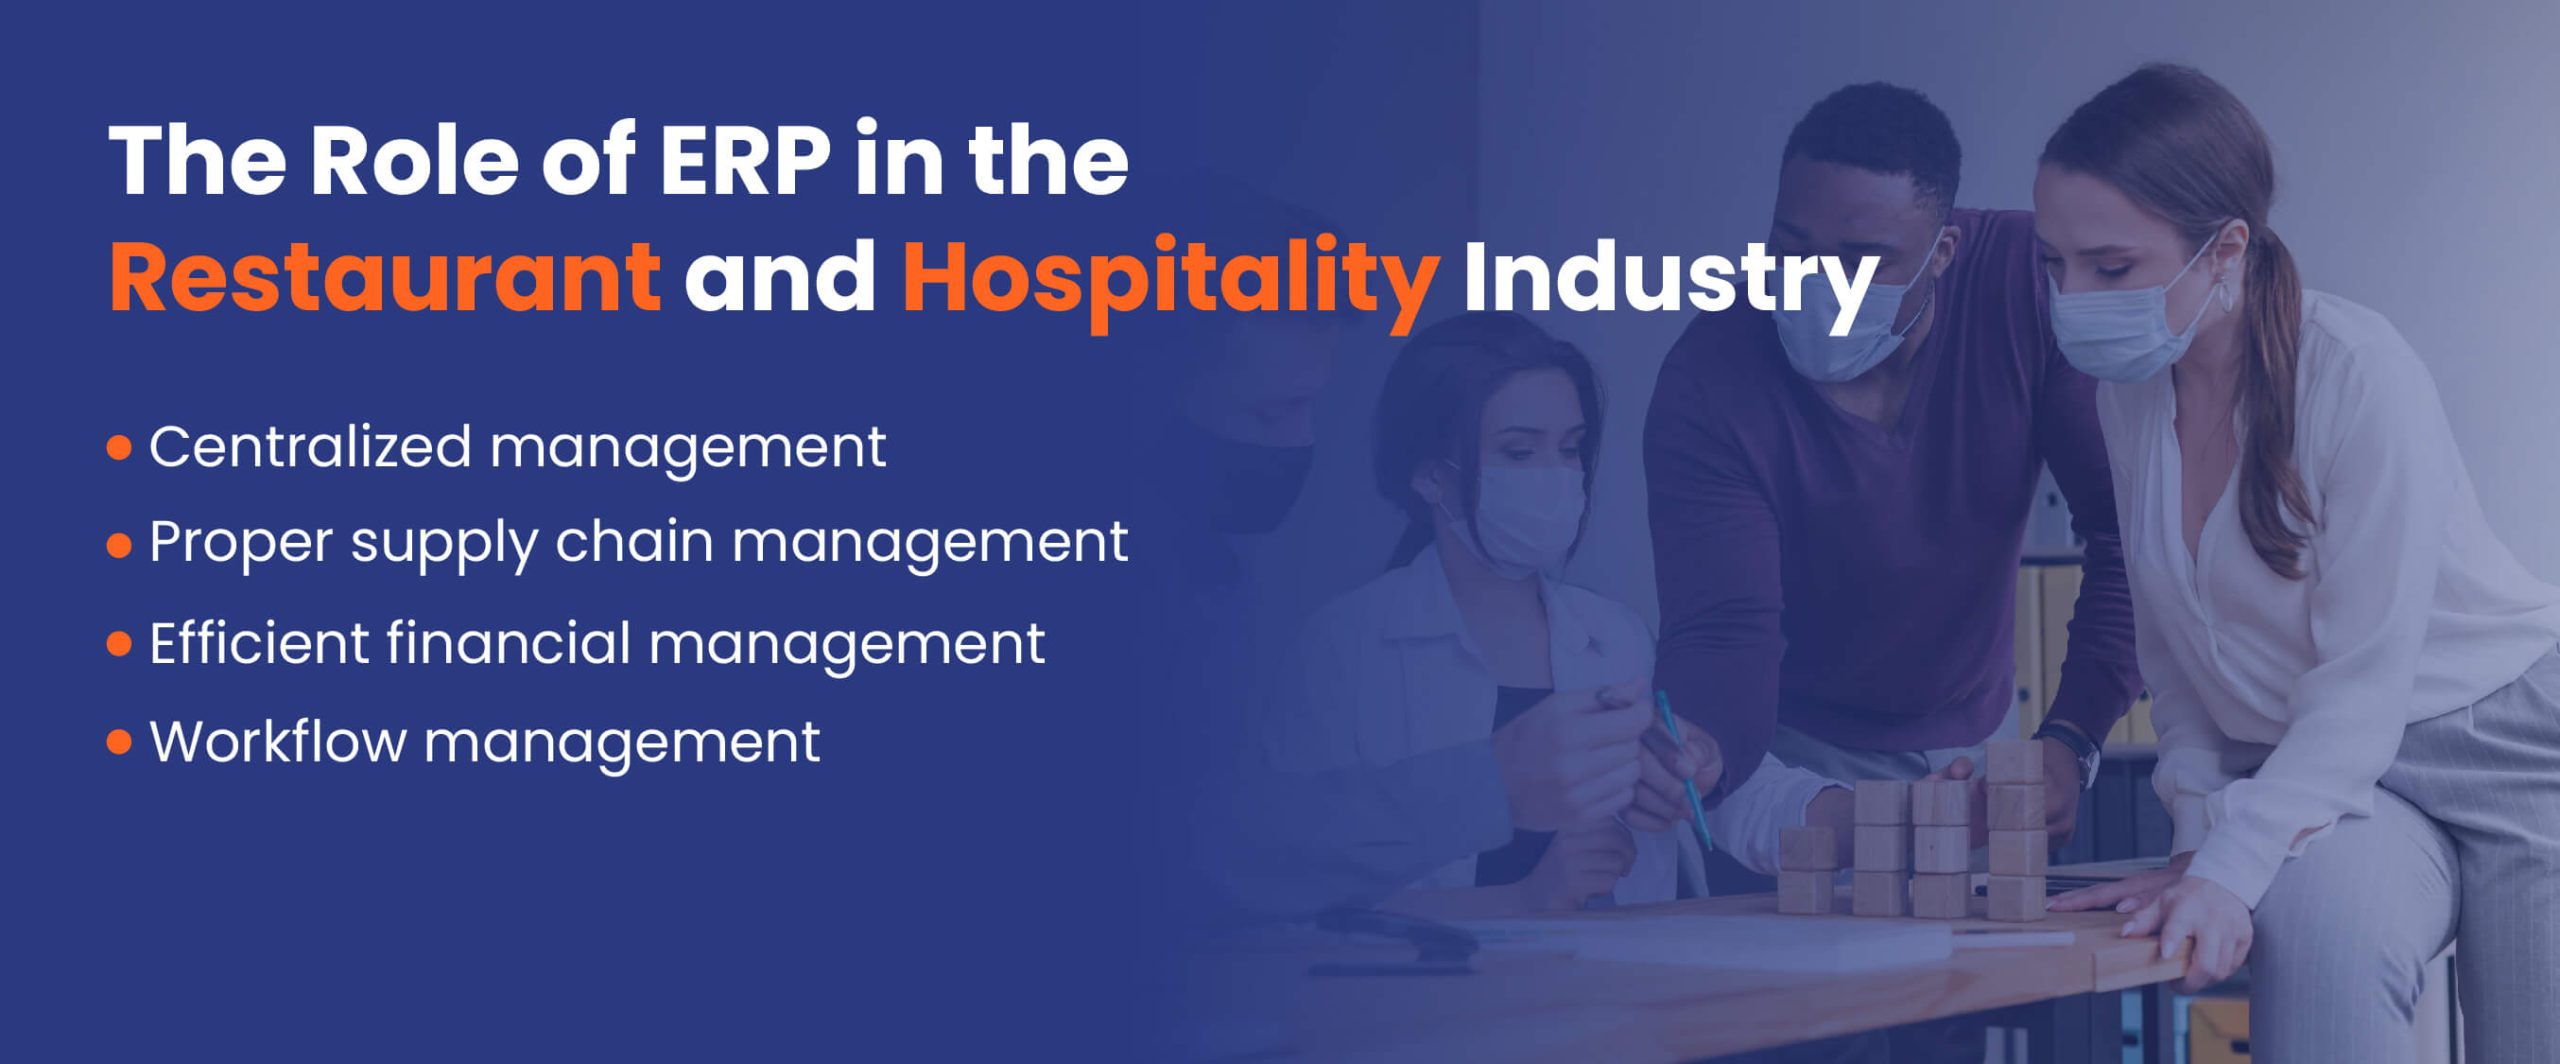 Role of ERP for Restaurant and Hospitality Industry